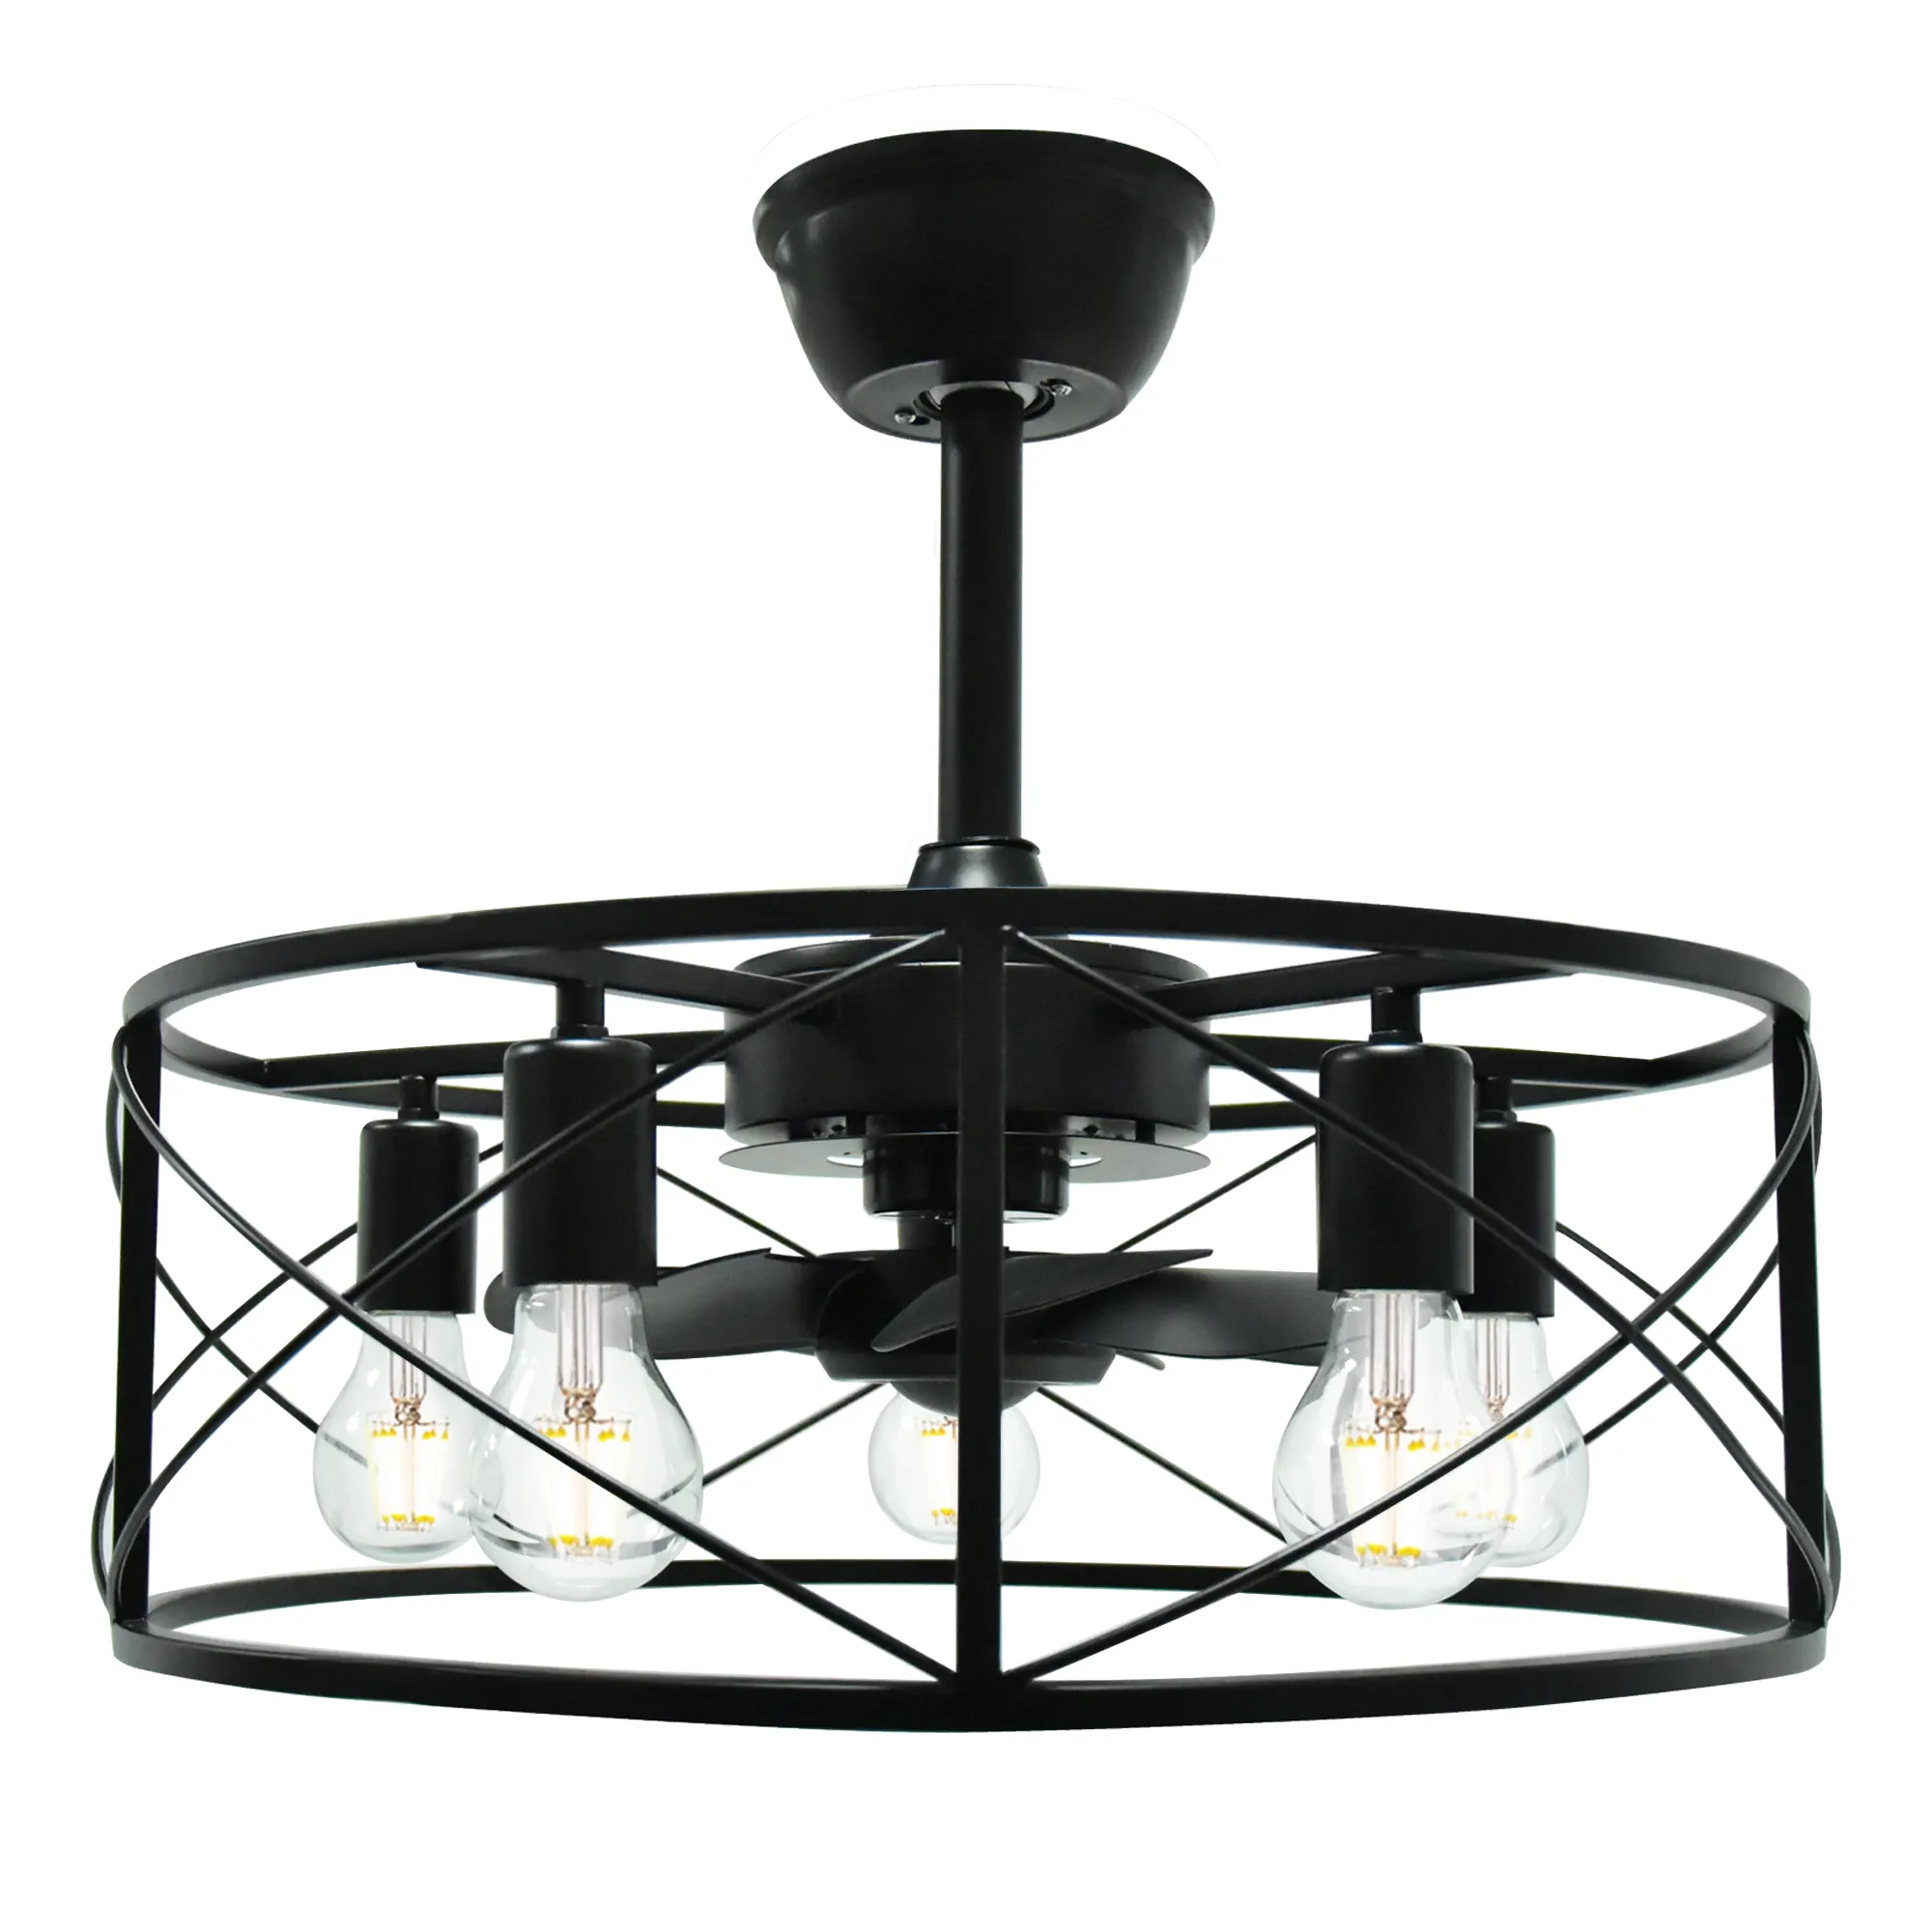 2022 American style home lamps Retro black wrought iron chandeliers Rustic retro ceiling lamps